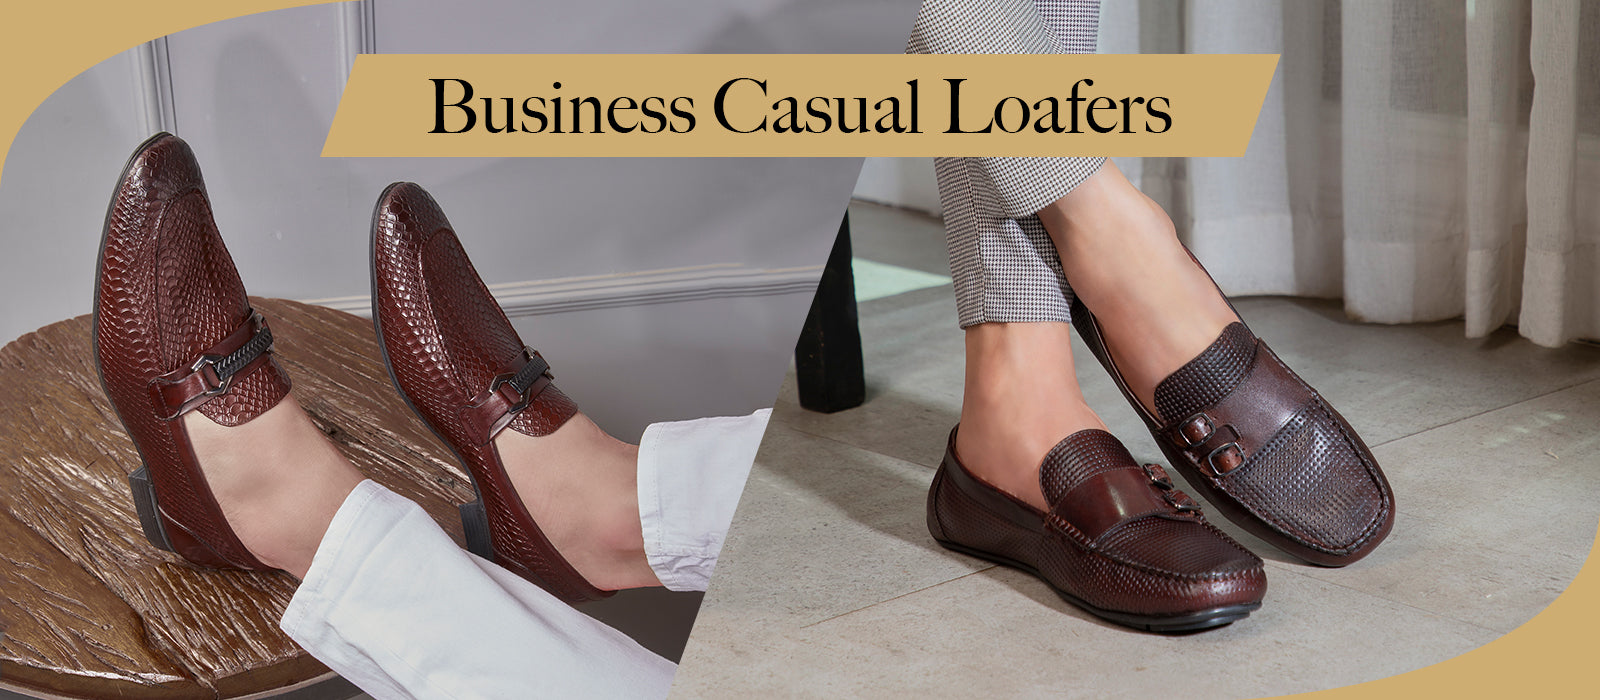 How did loafers become the best option for business casuals?